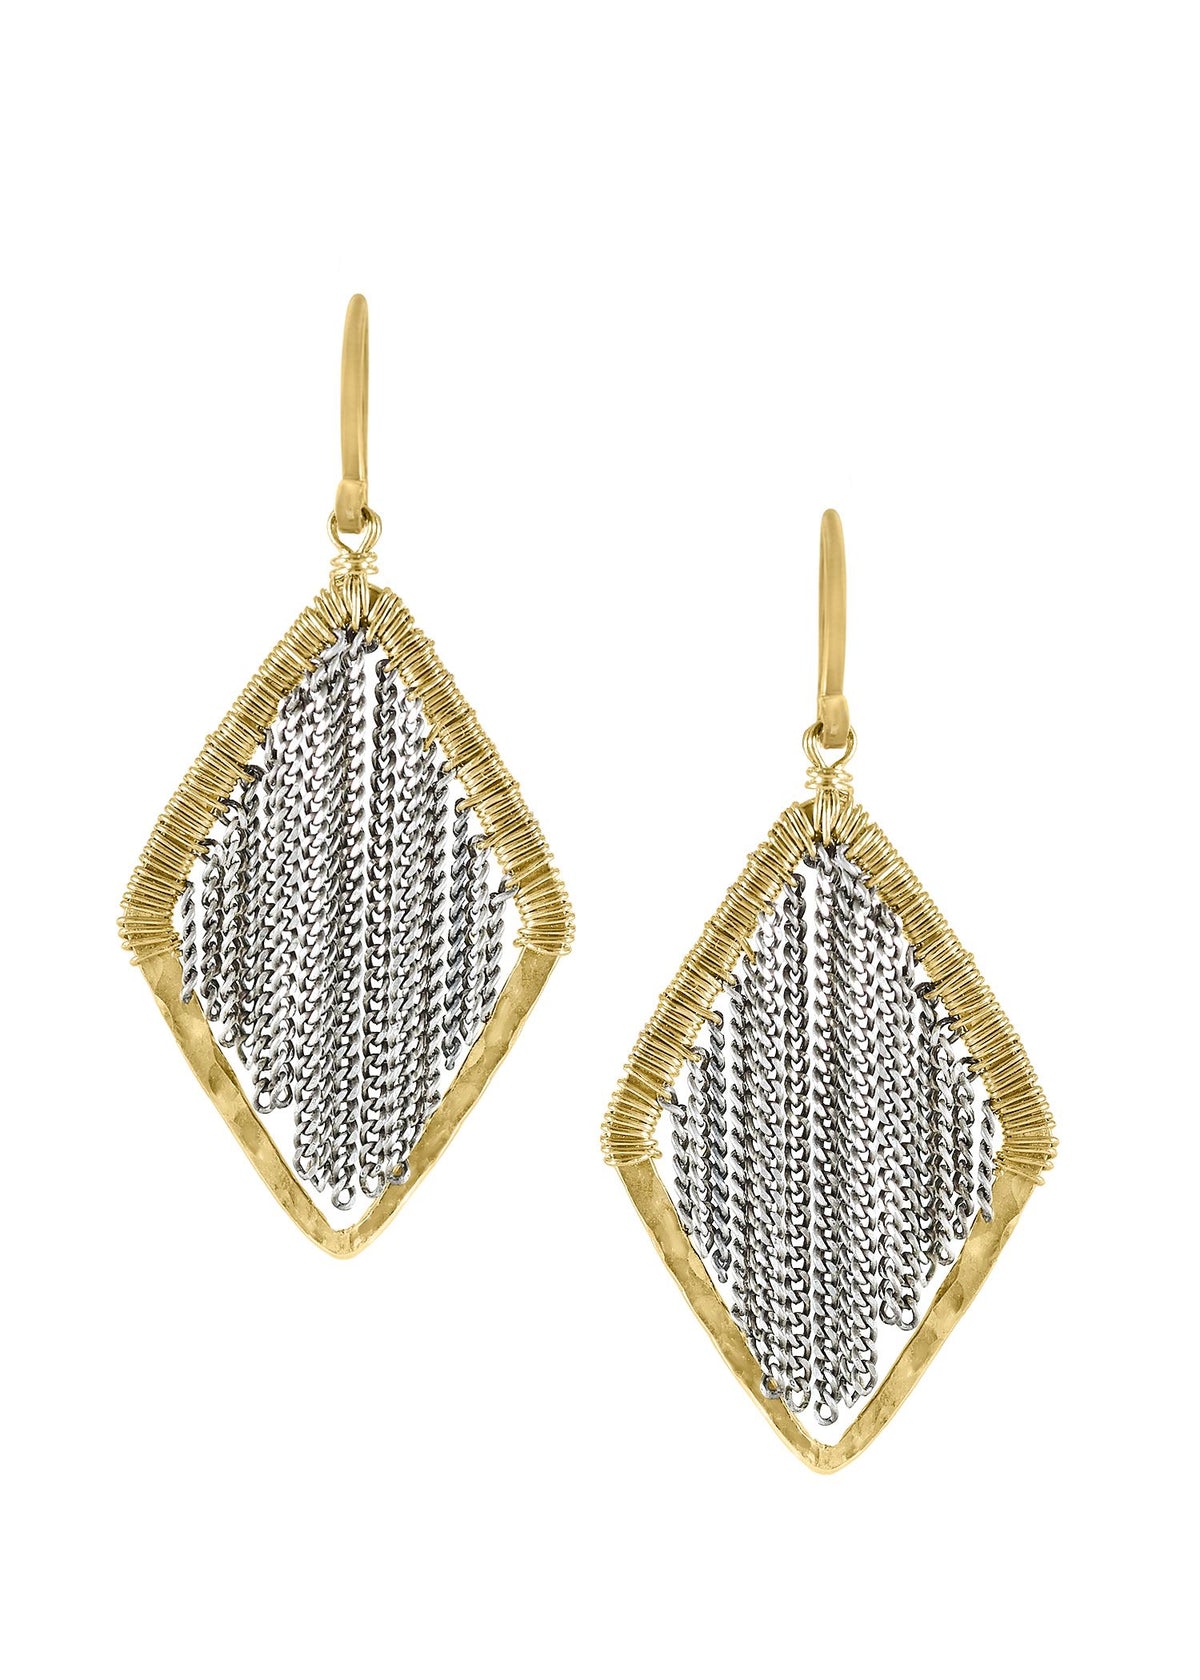 14k gold fill Sterling silver Mixed metal Earrings measure 1-1/2&quot; in length (including the ear wires) and 11/16&quot; in width Handmade in our Los Angeles studio